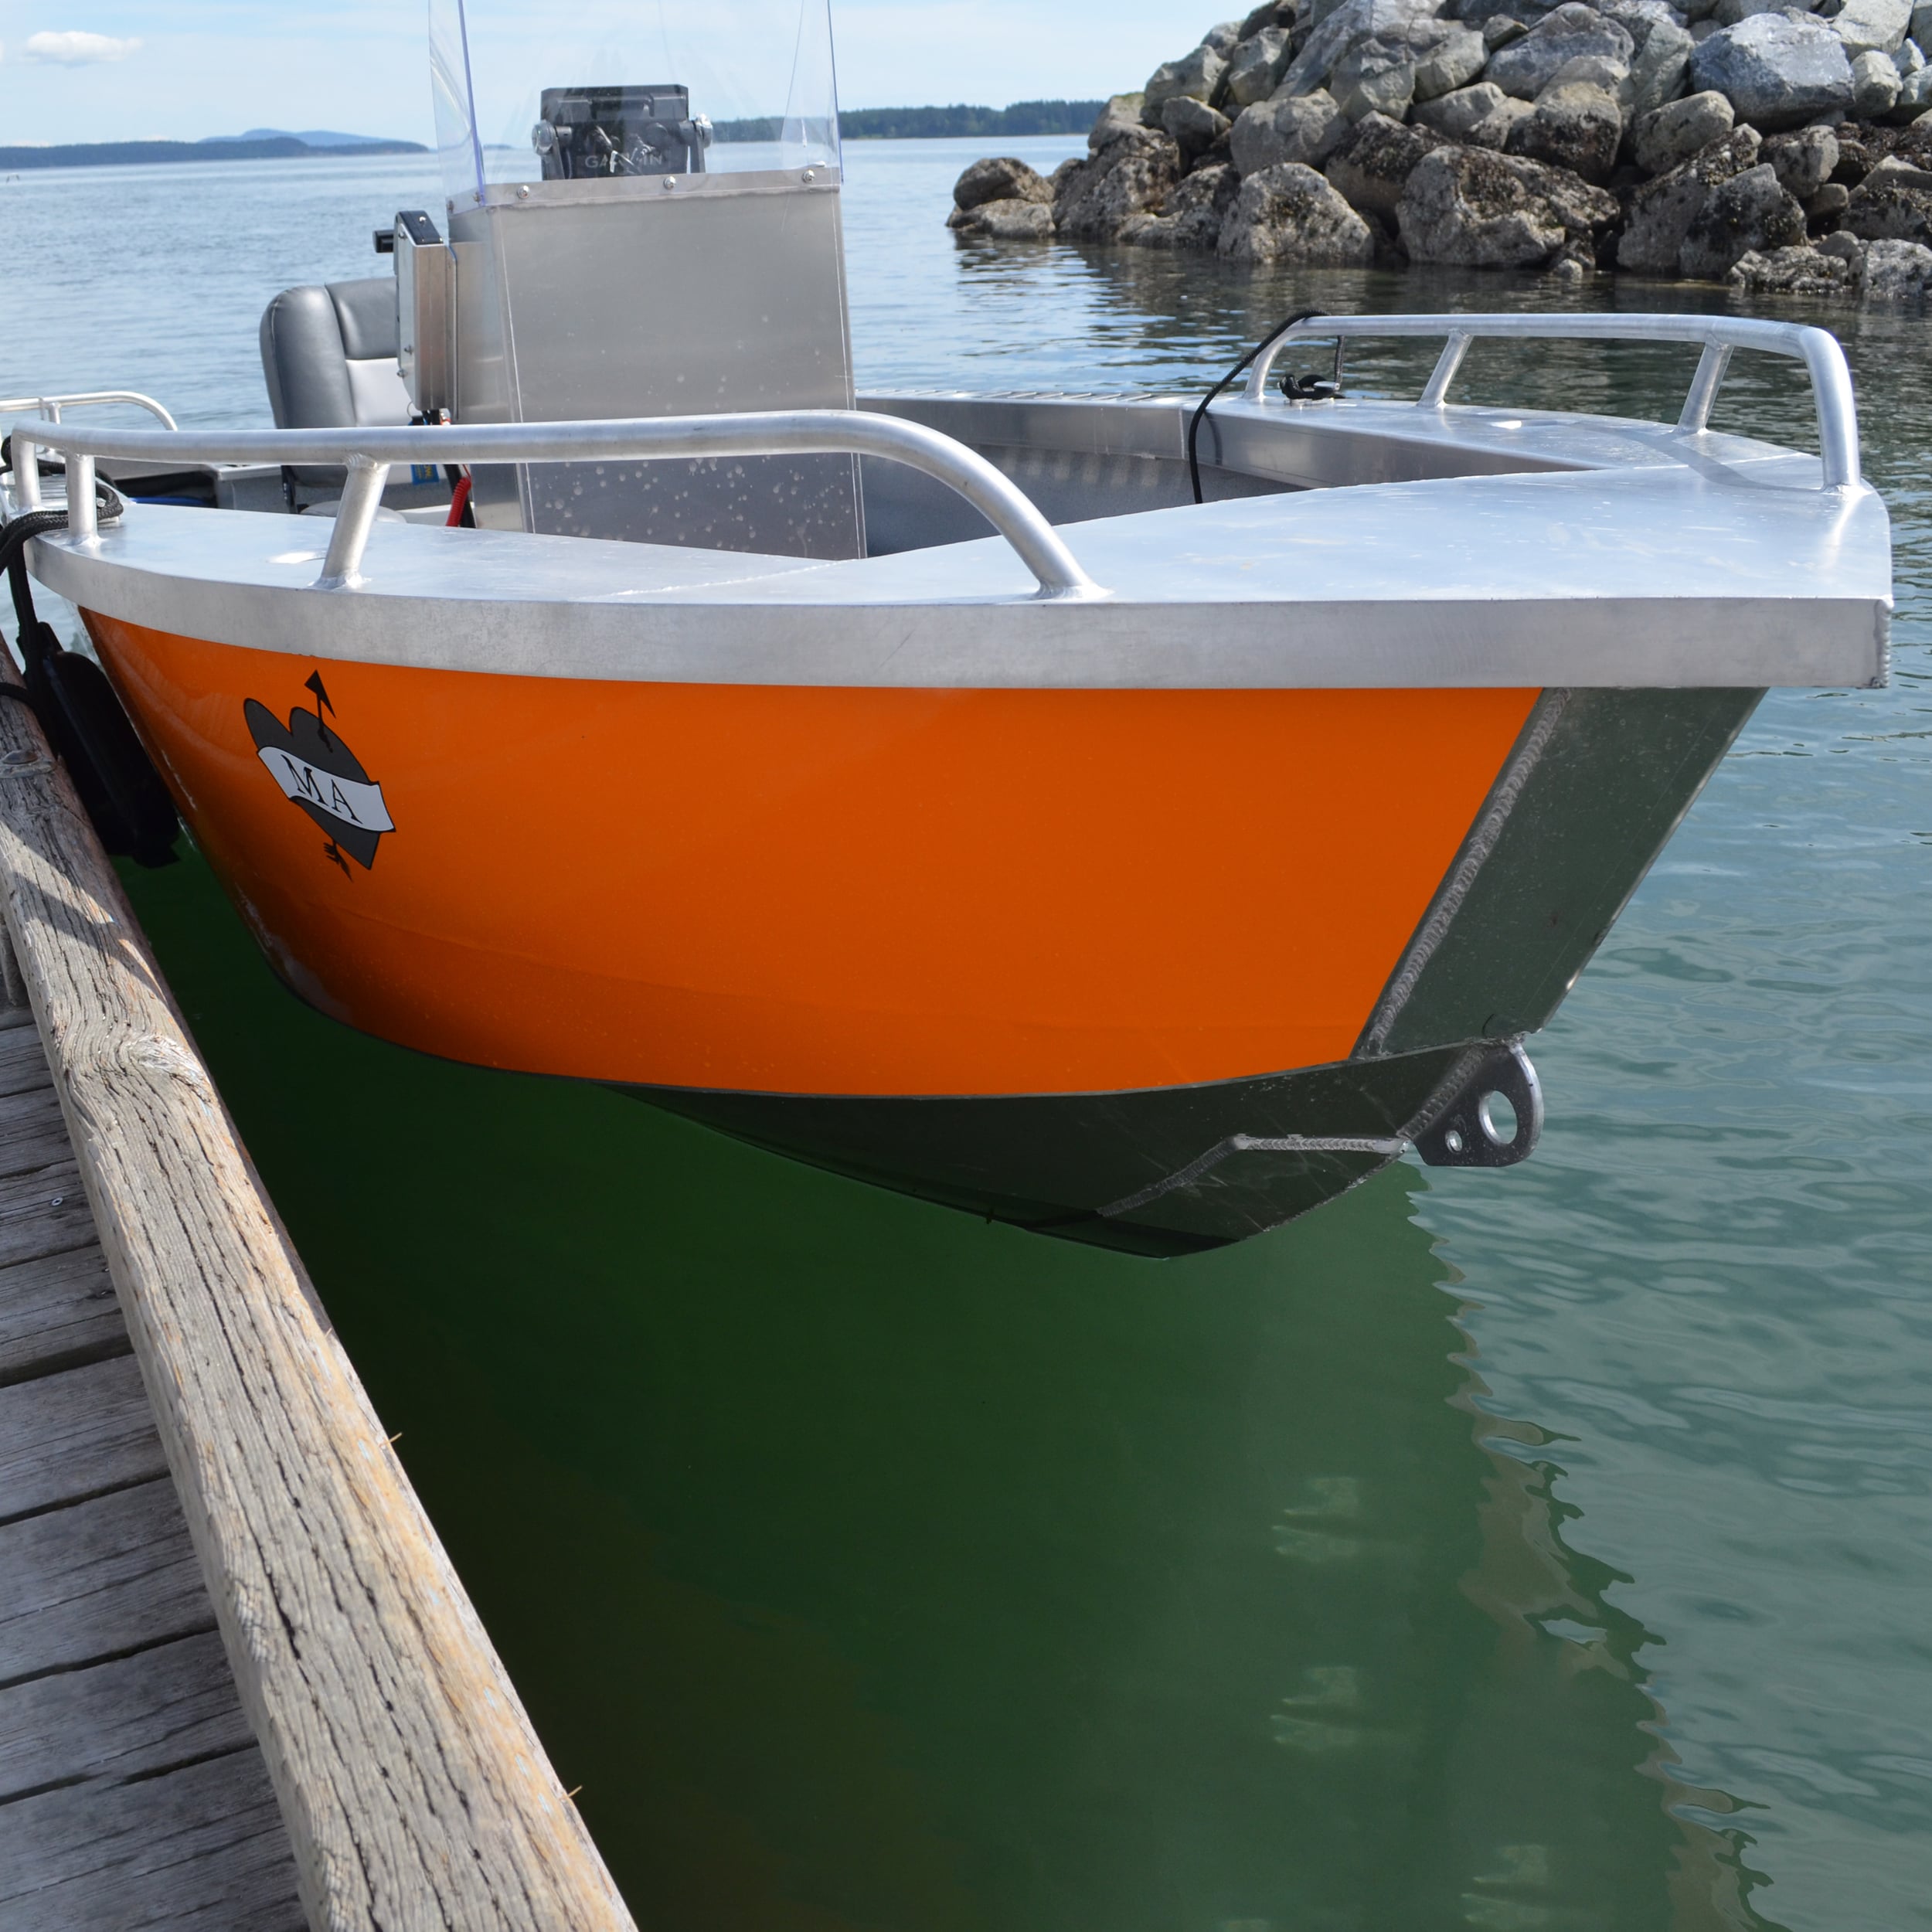 Bow of 16 foot aluminum boat manufactured Sidney BC British Columbia Canada by JR Marine